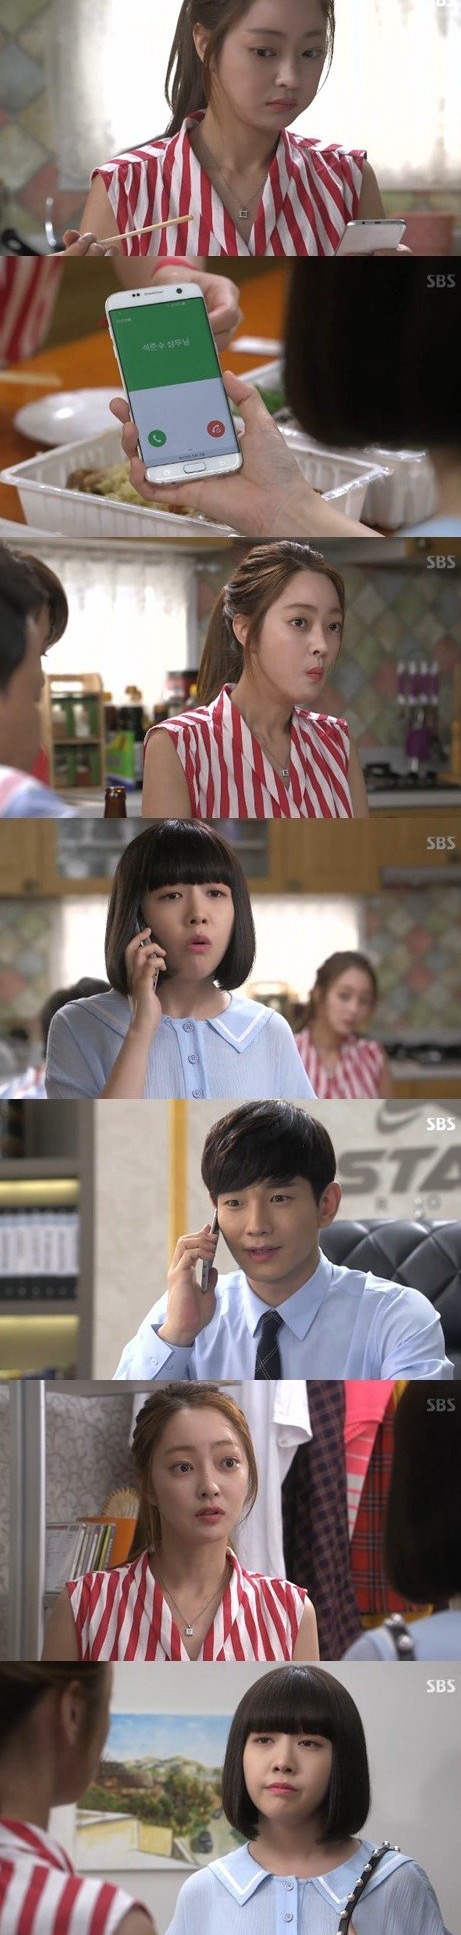 episodes 13 and 14 captures for the Korean drama 'Beautiful Gong Shim'